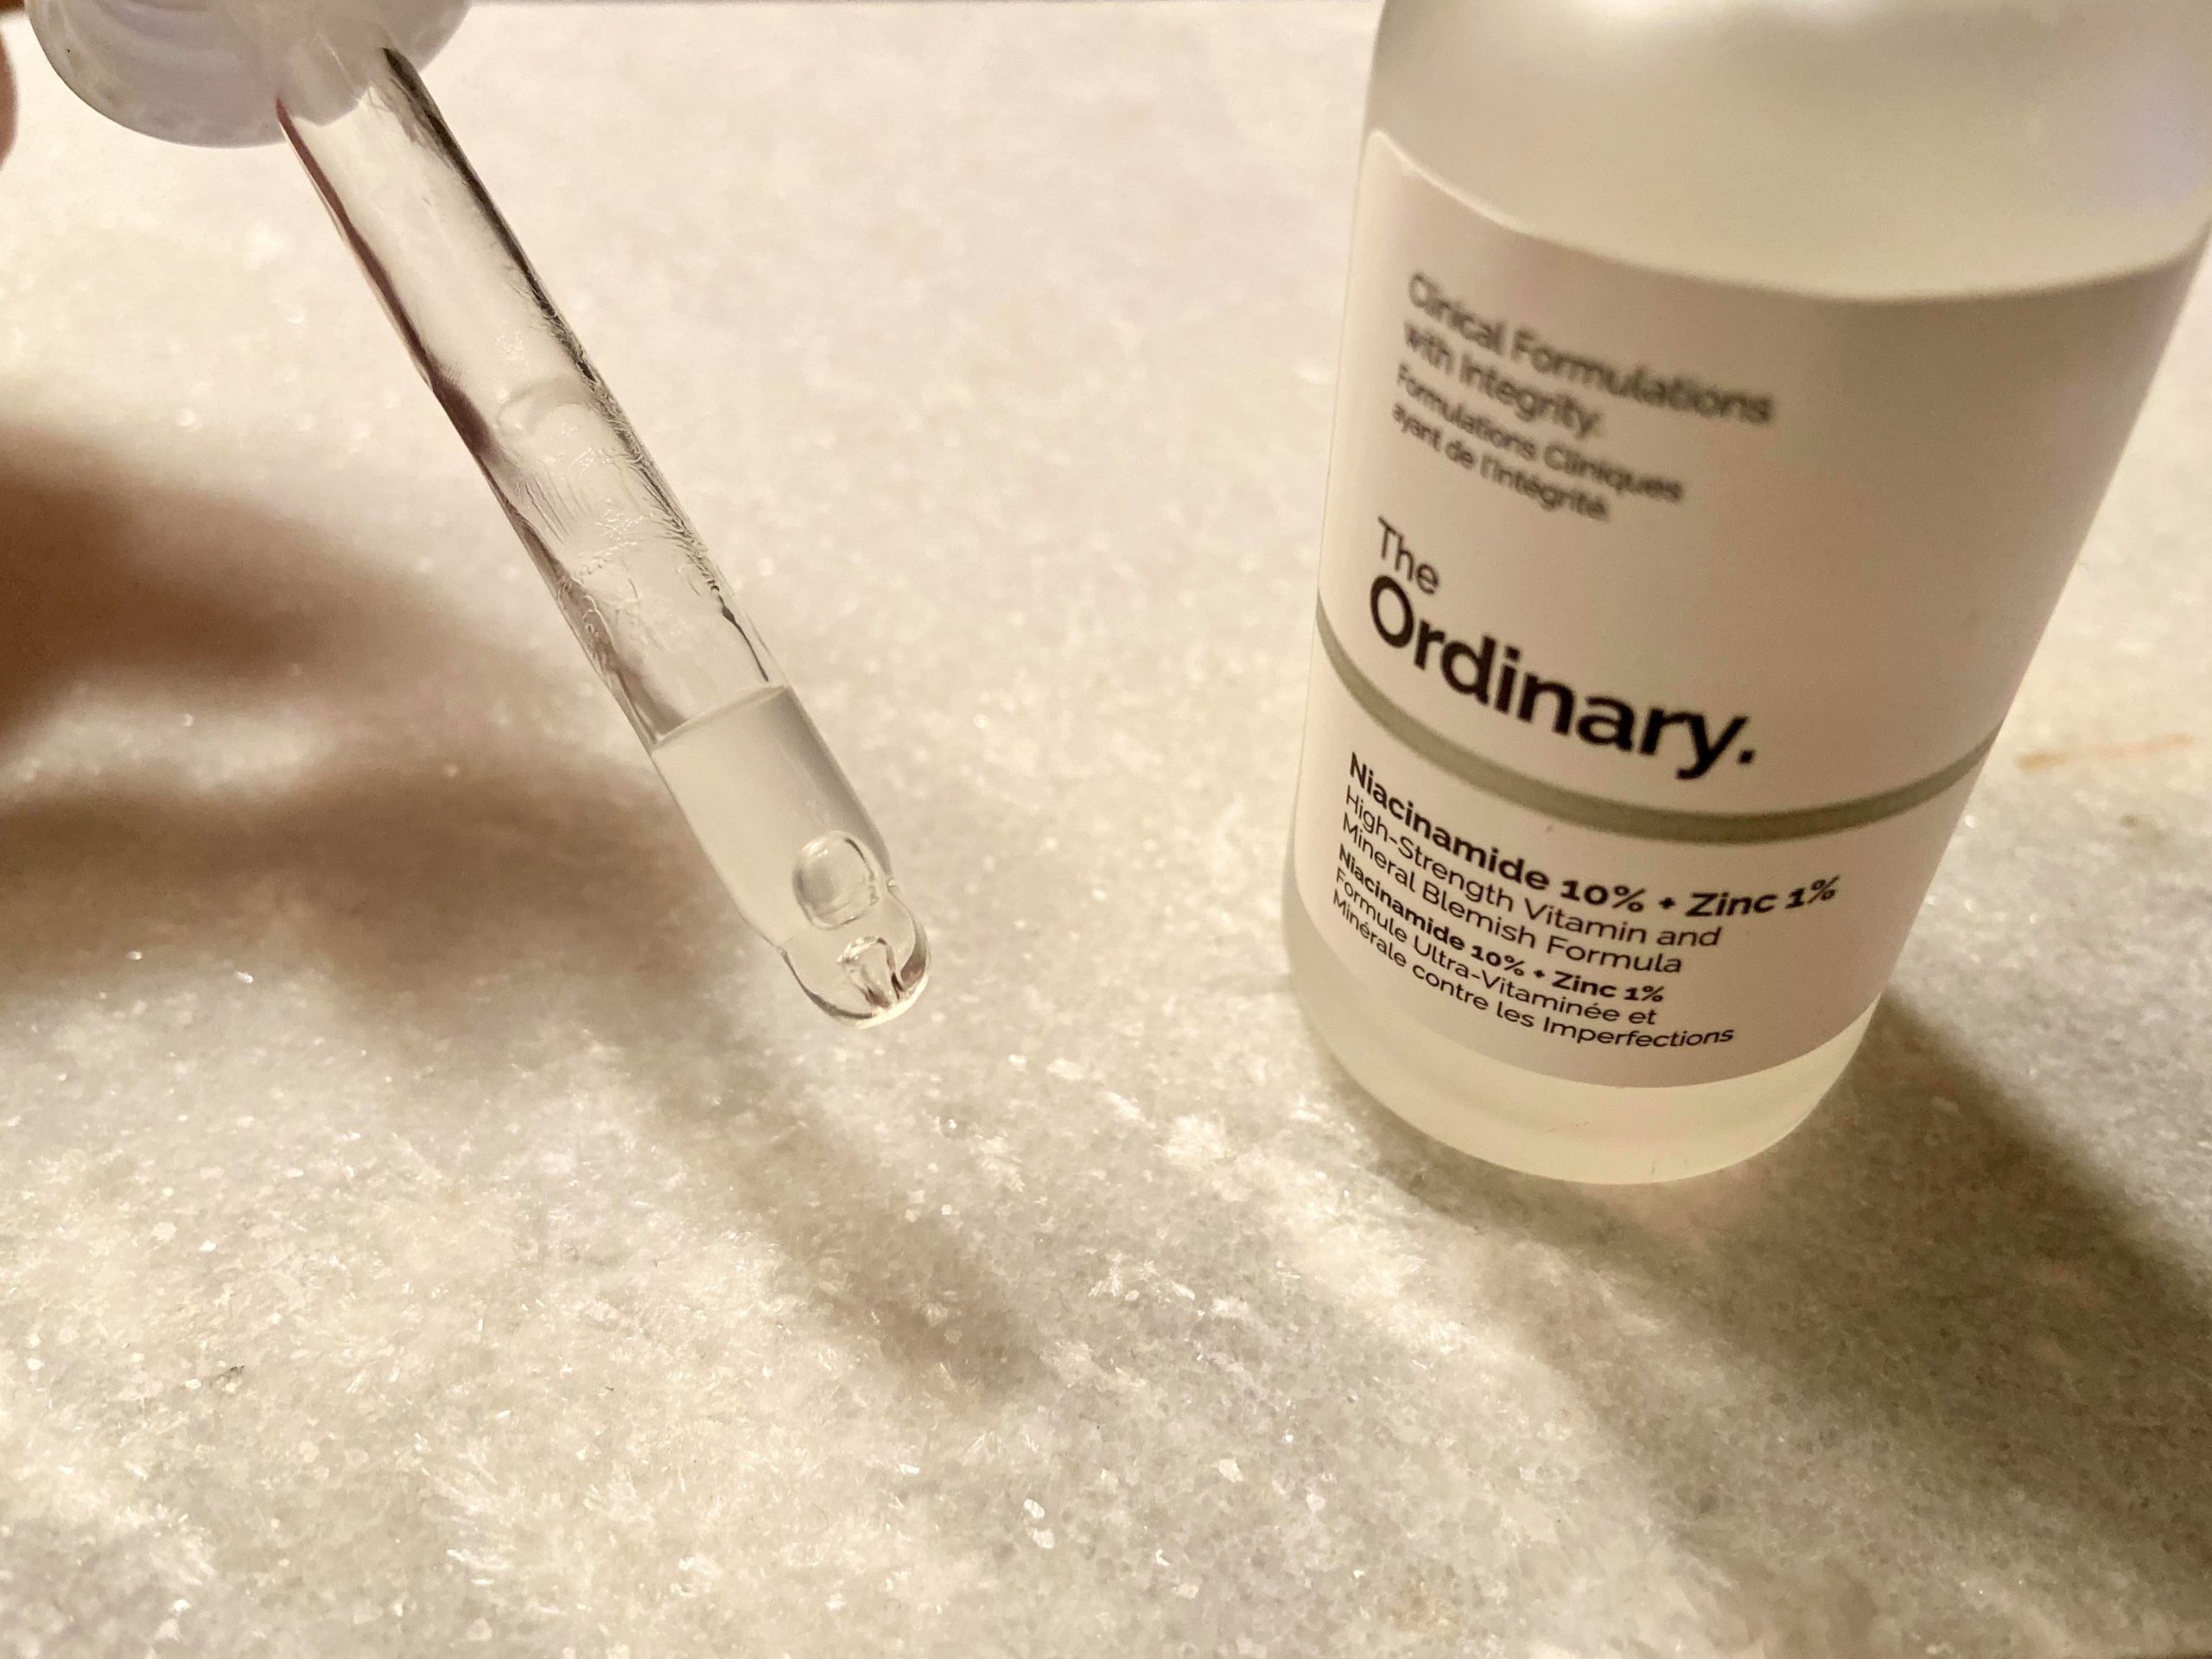 The Ordinary's Niacinamide Is the First Product That Really